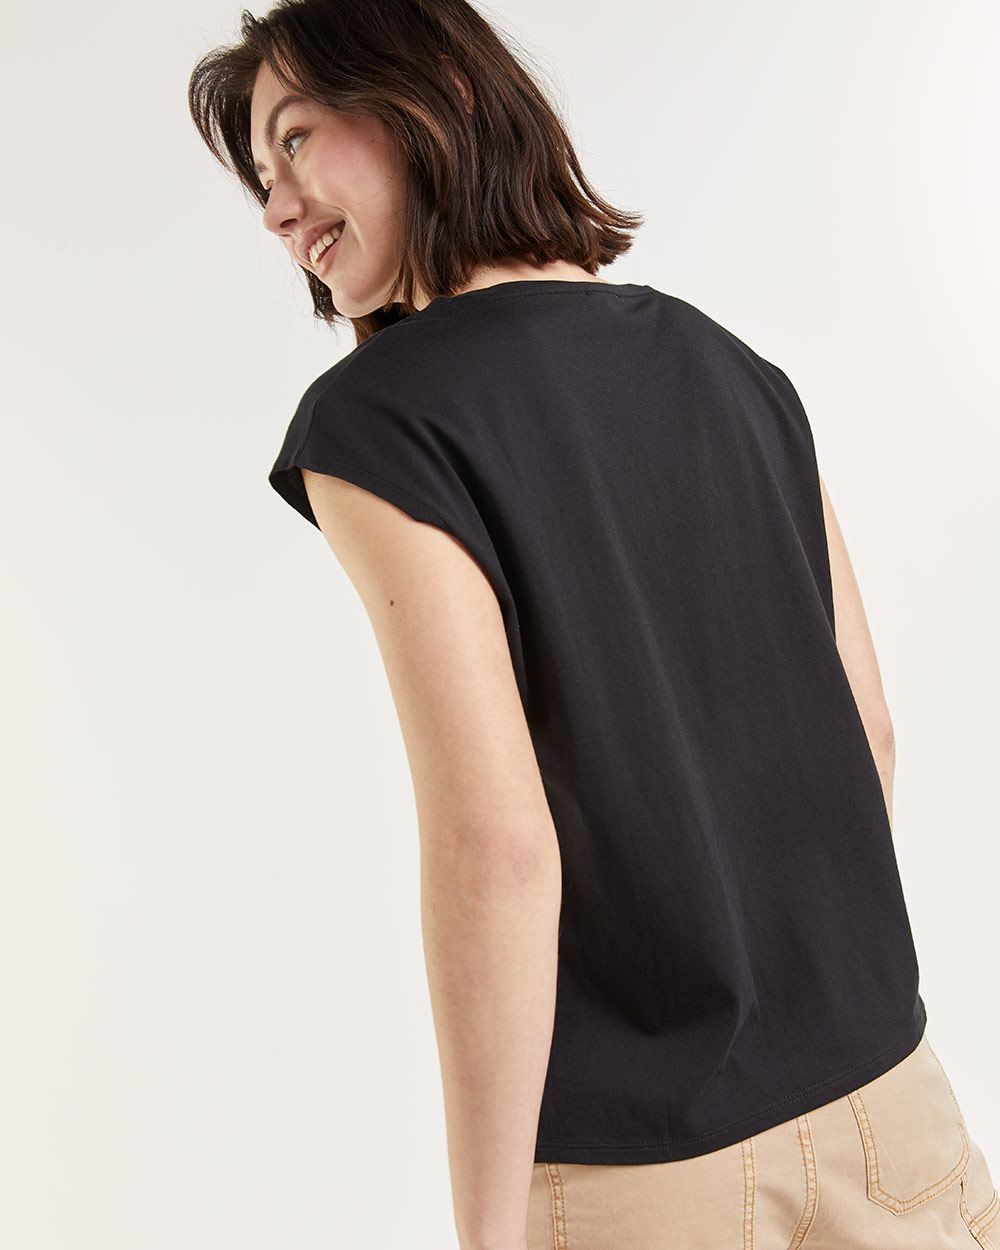 Screen Printed Extended Cap Sleeve Cotton Modal Tee